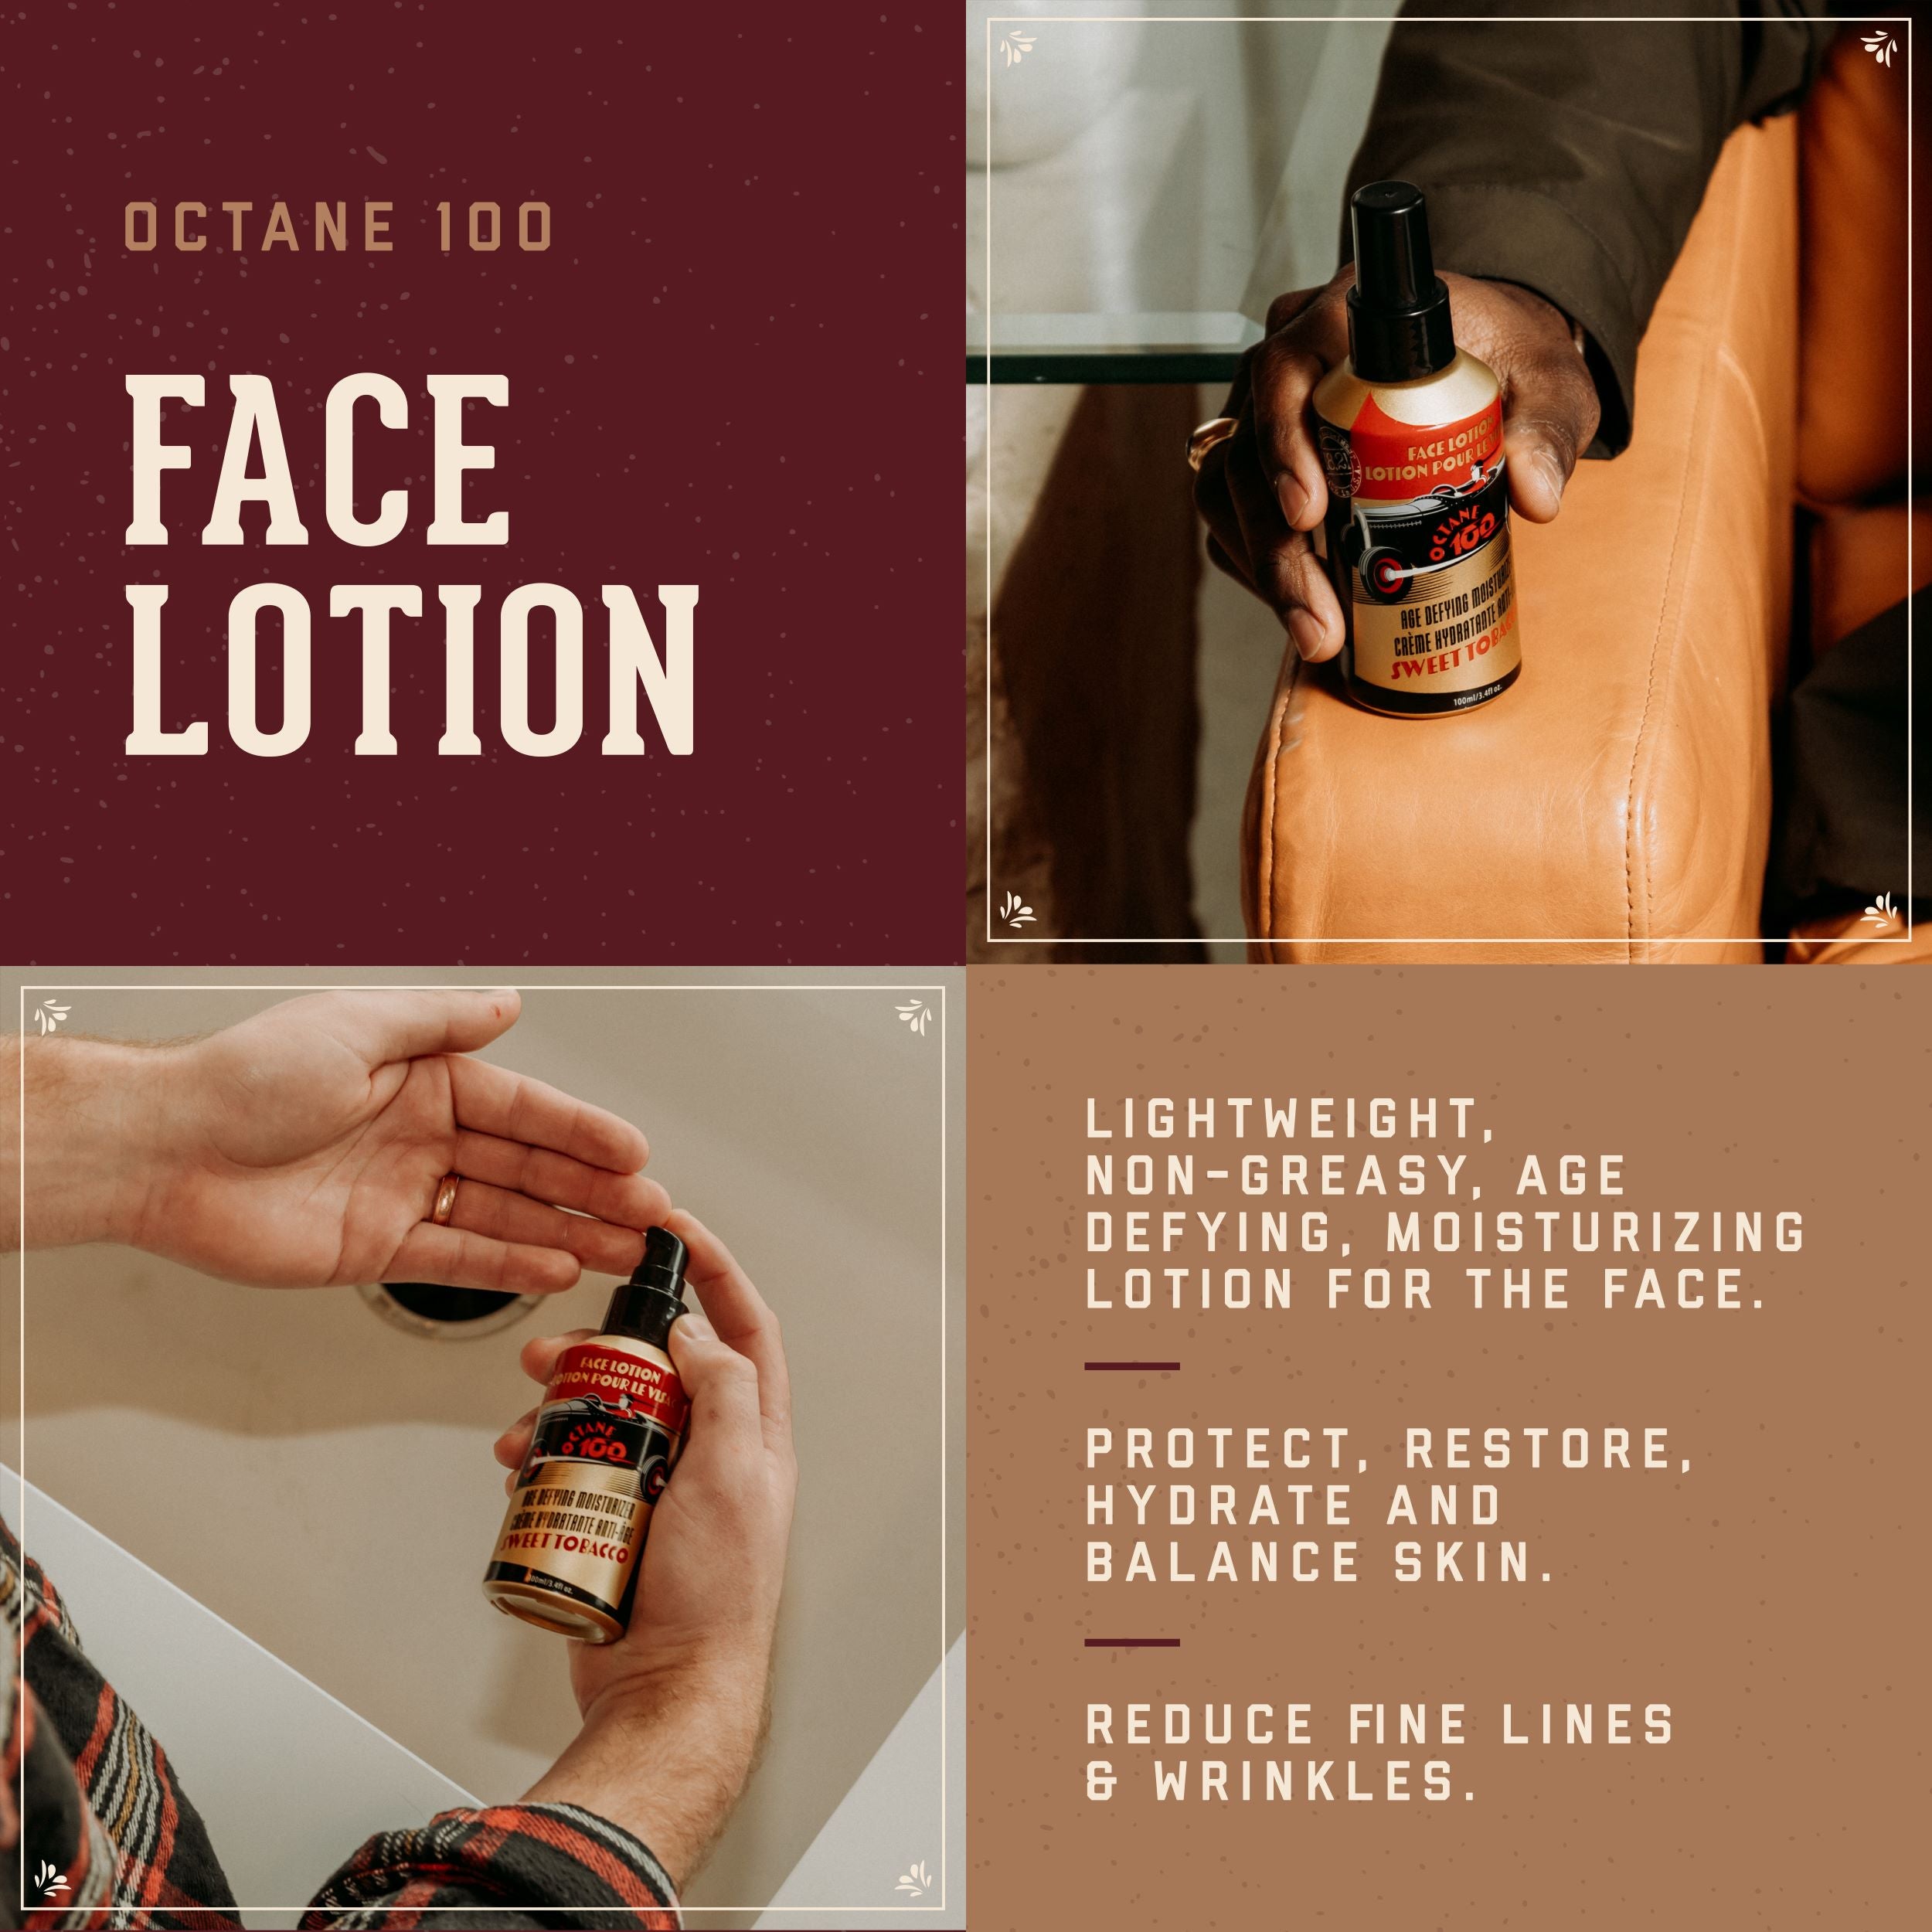 Octane 100 Face Lotion.  Lightweight, non-greasy, age defying, moisturizing lotion for the face.  Protect, restore, hydrate and balance skin.   Reduce fine lines and wrinkles.